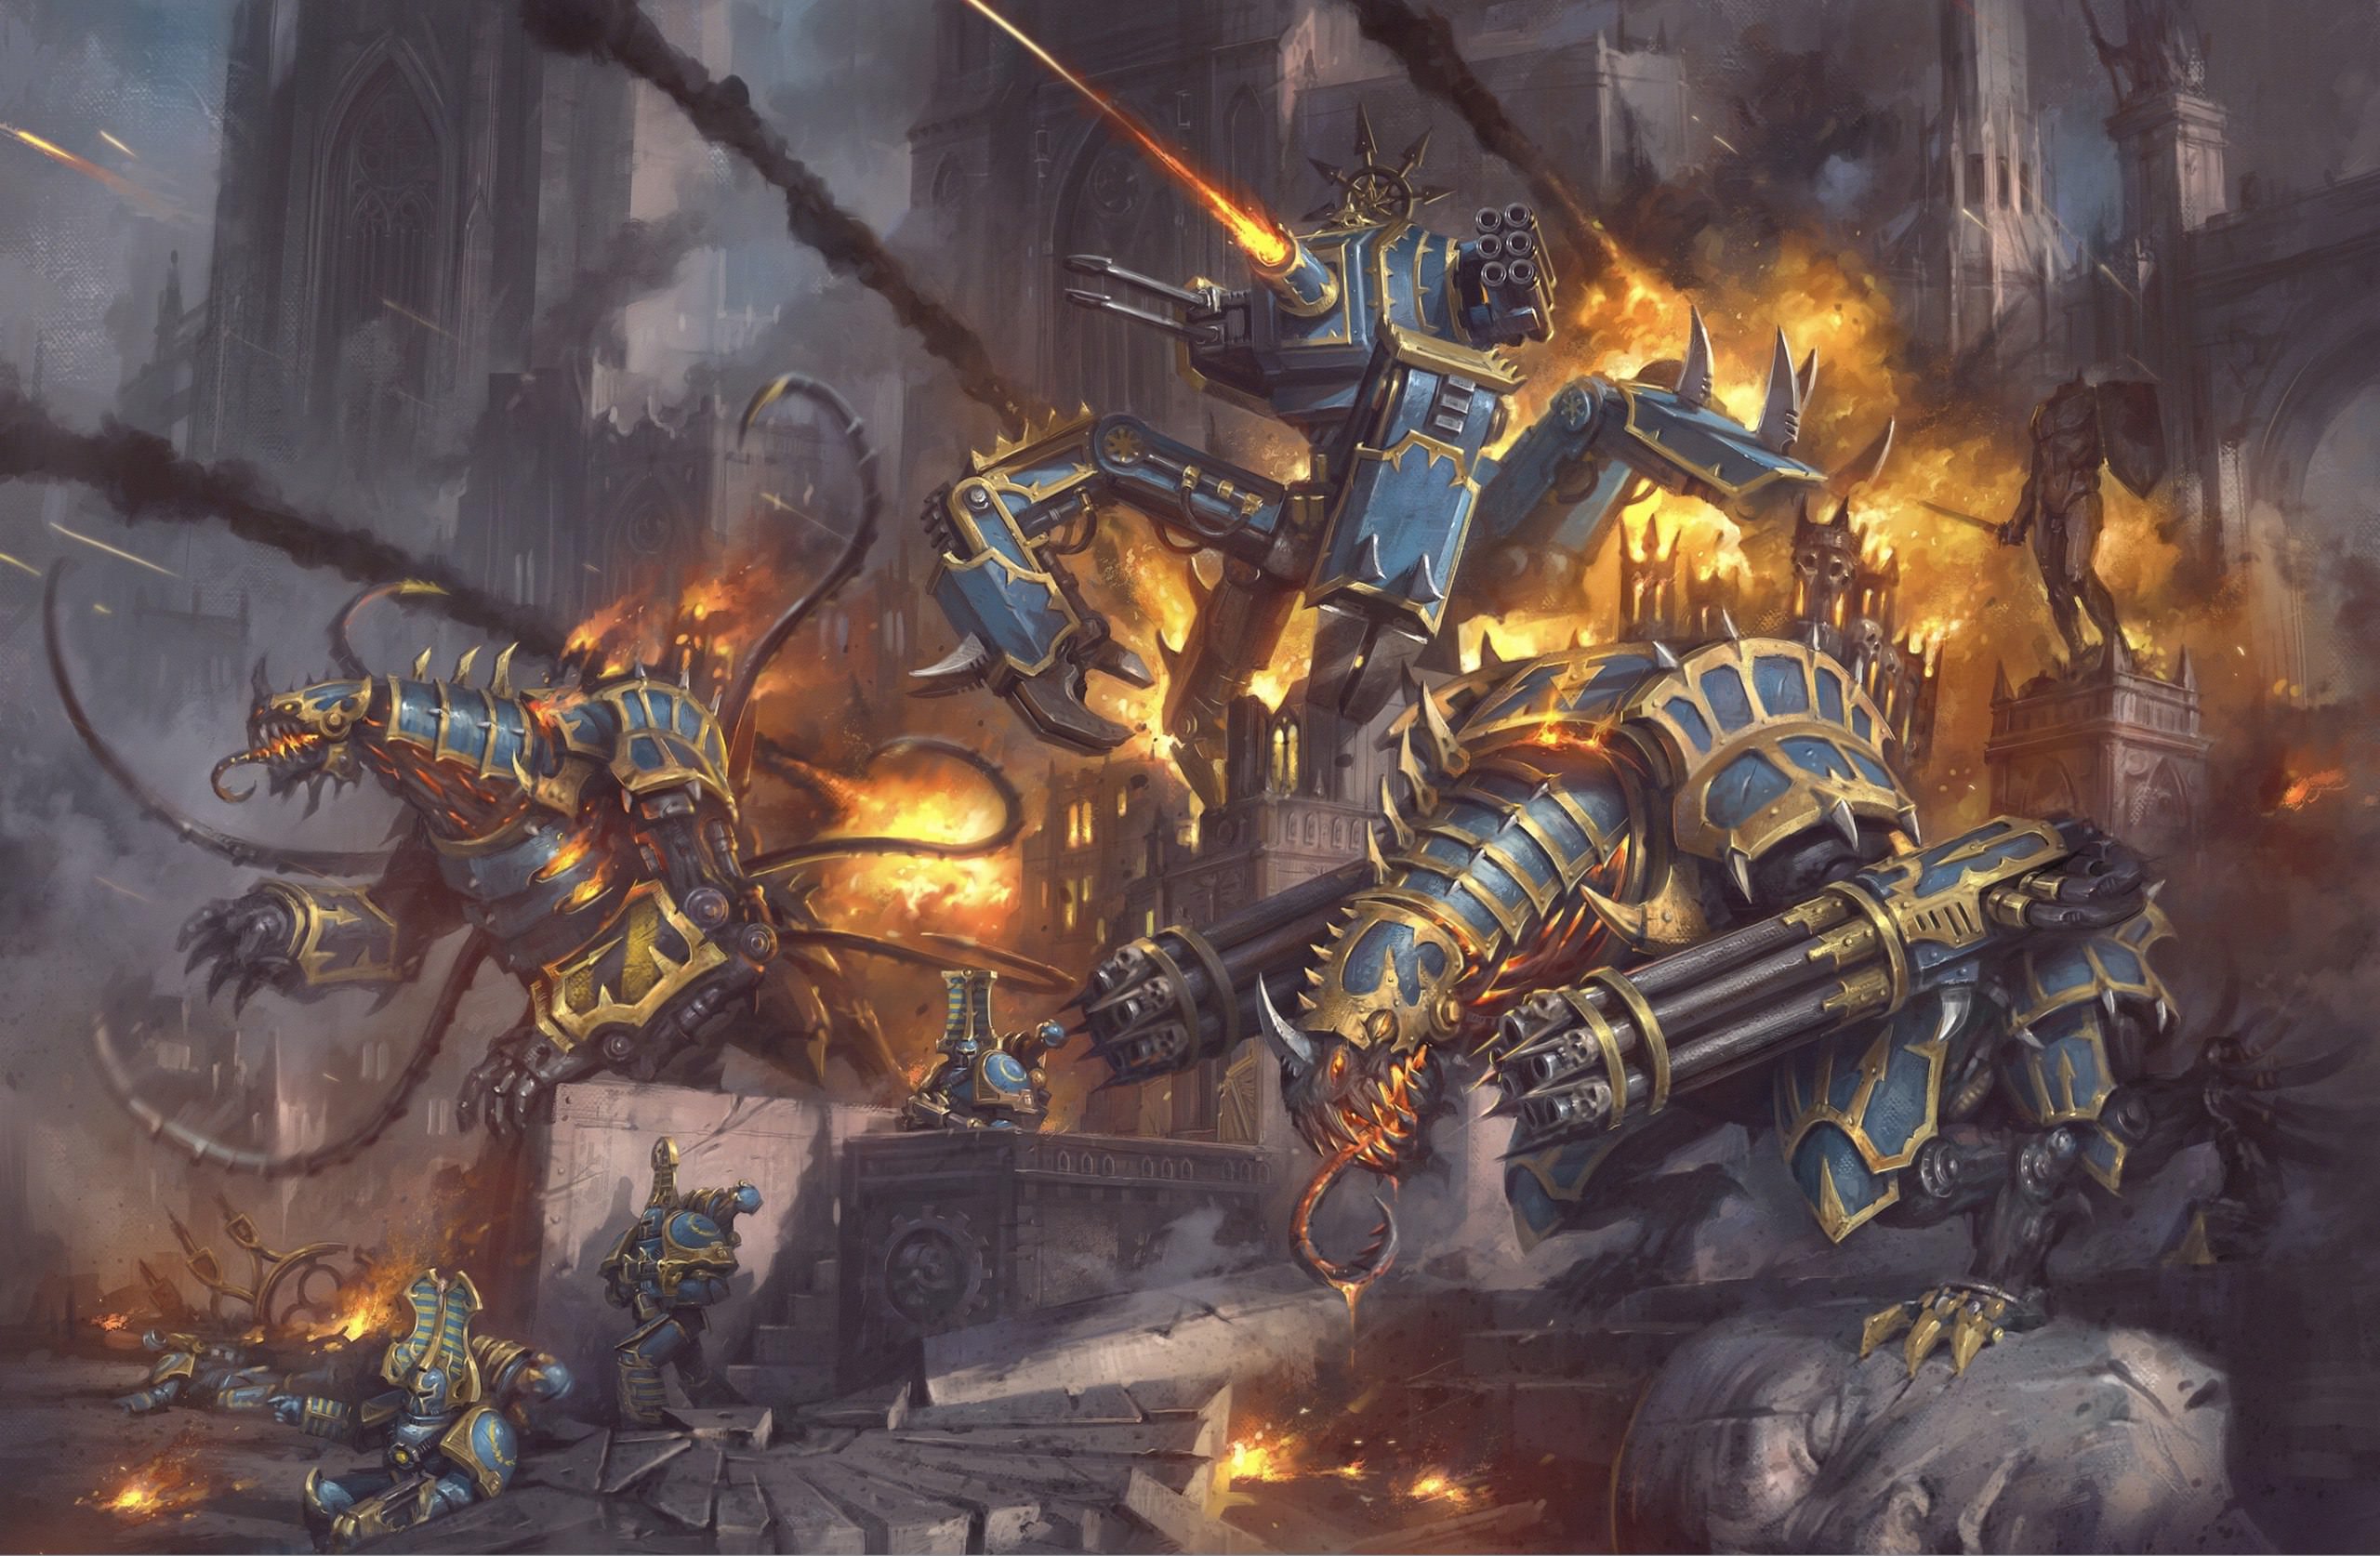 General 2560x1674 Warhammer 40,000 Games Workshop Chaos Chaos Space Marine Chaos Space Marines Thousand Sons digital art